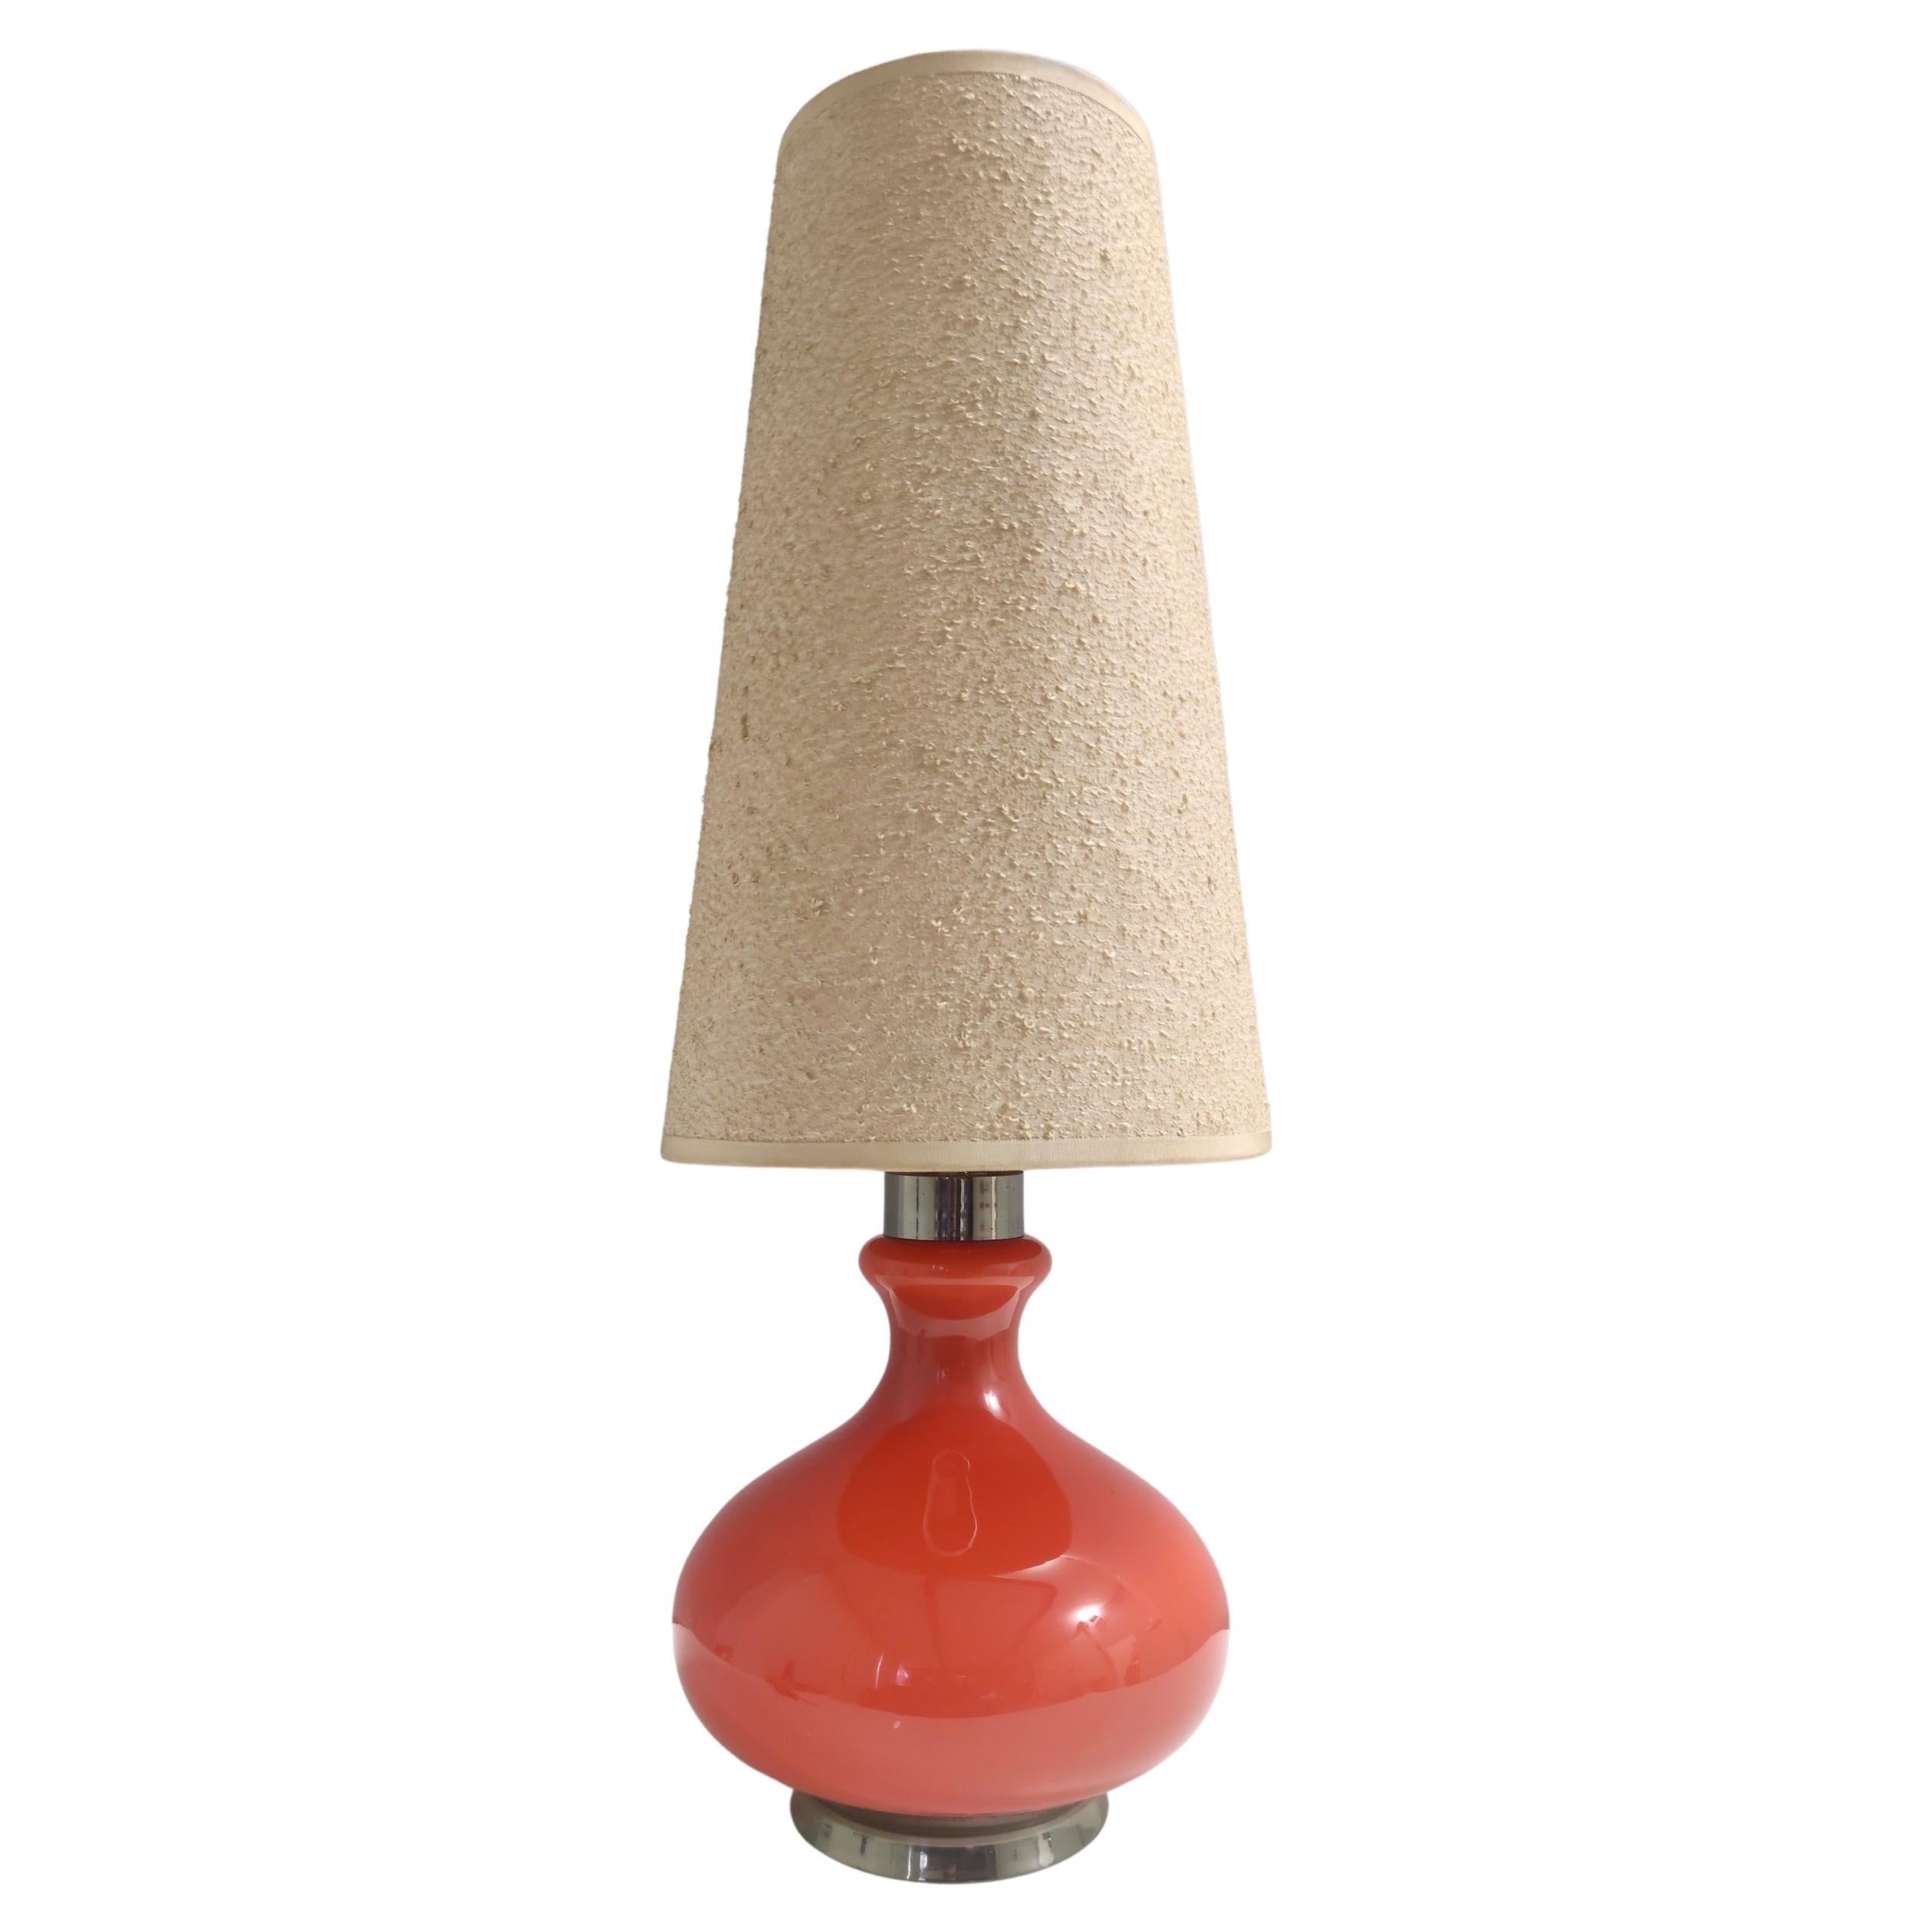 Large and Uncommon Postmodern Orange Table Lamp by Carlo Nason, Murano, Italy For Sale